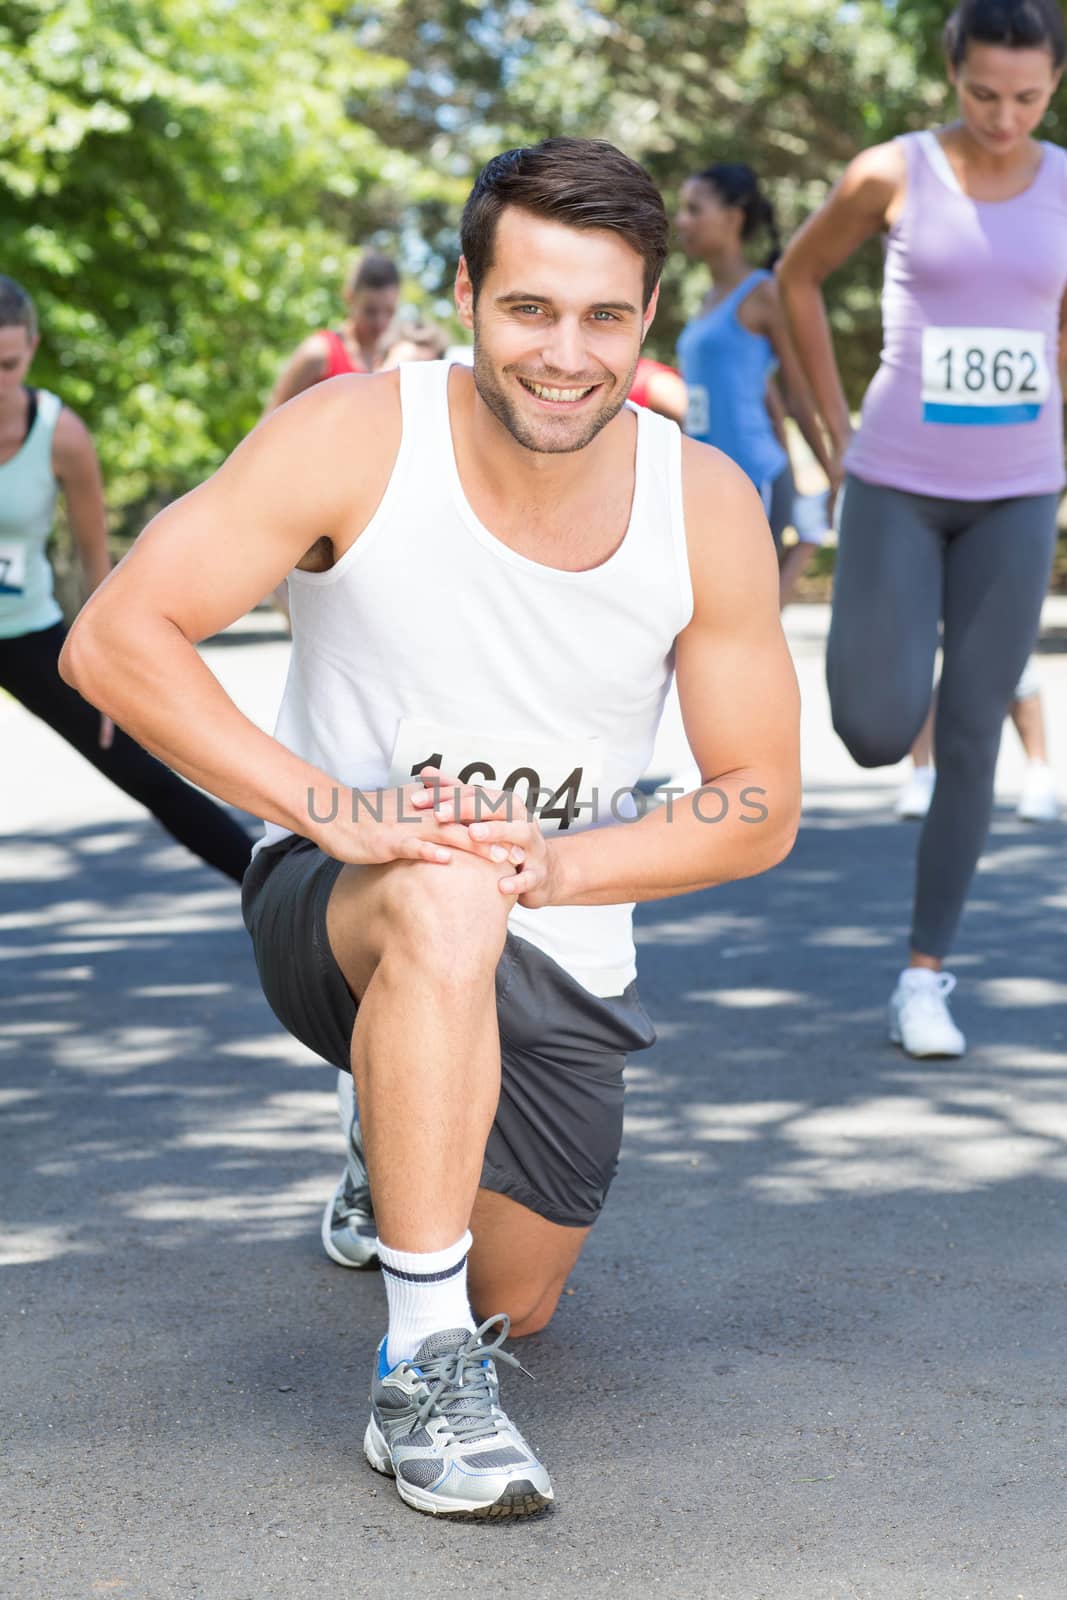 Smiling man warming up before race by Wavebreakmedia